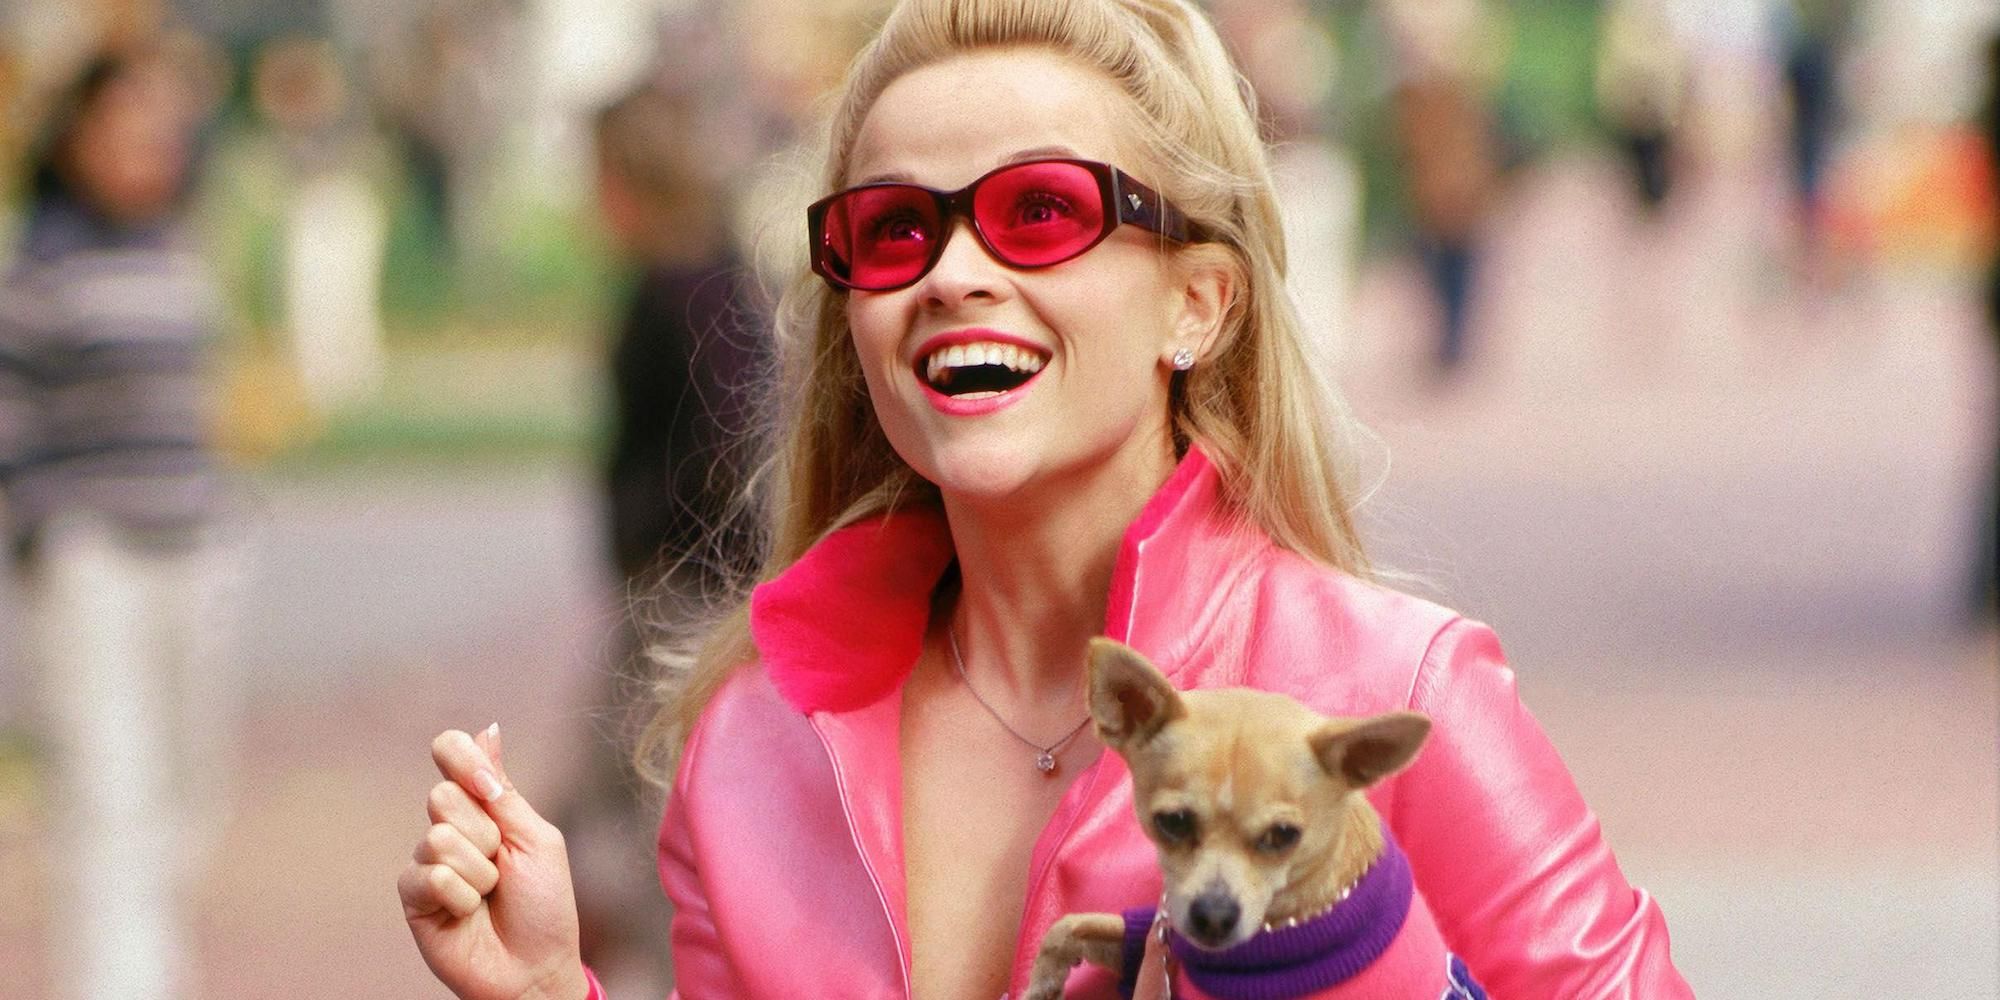 Elle laughs outside in Legally Blonde 3